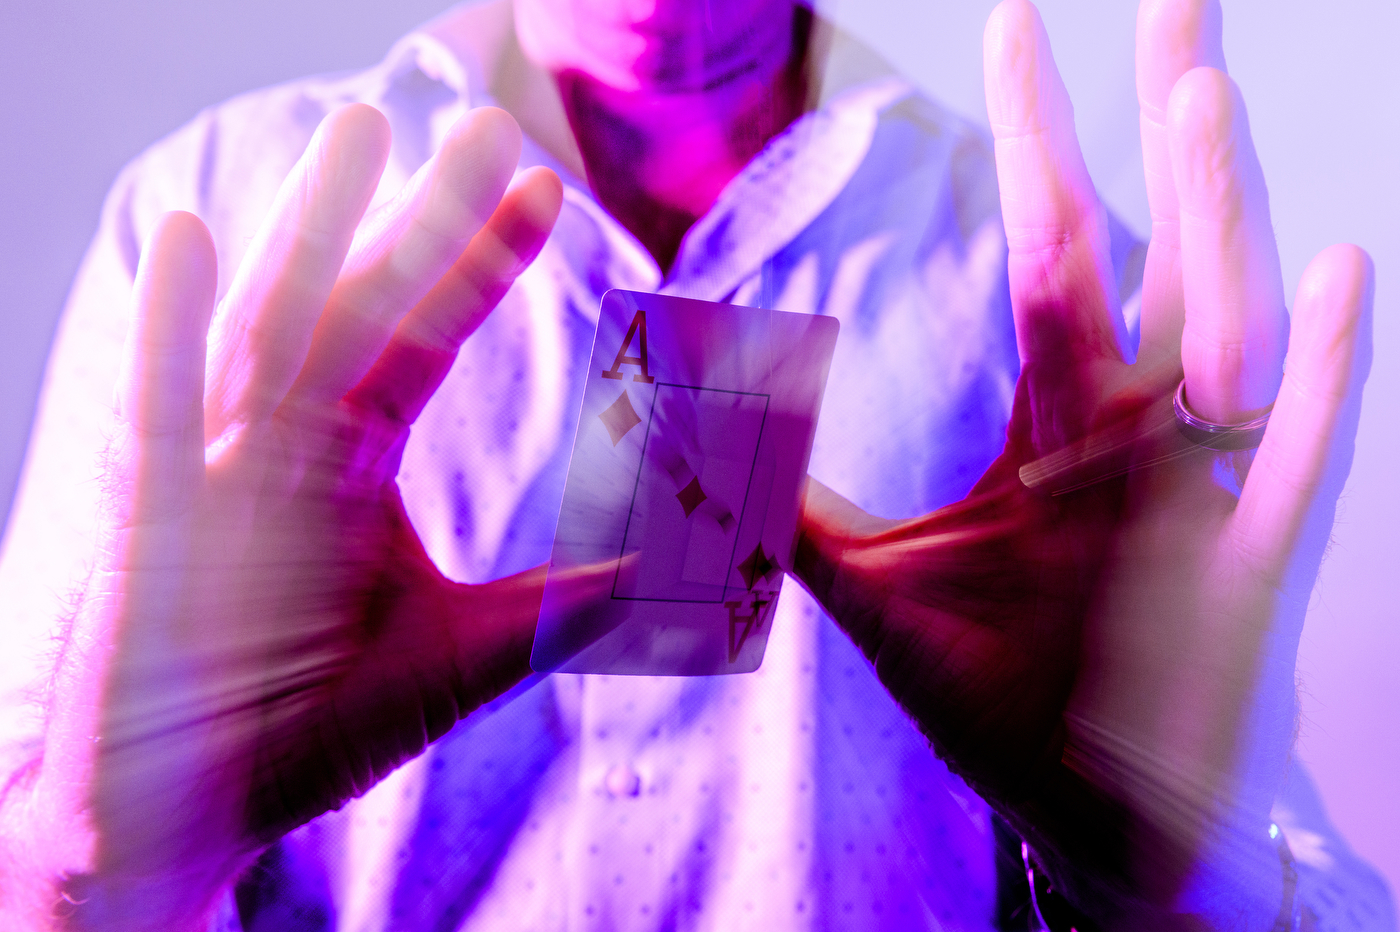 Person performing card trick with purple overlay on the photo.